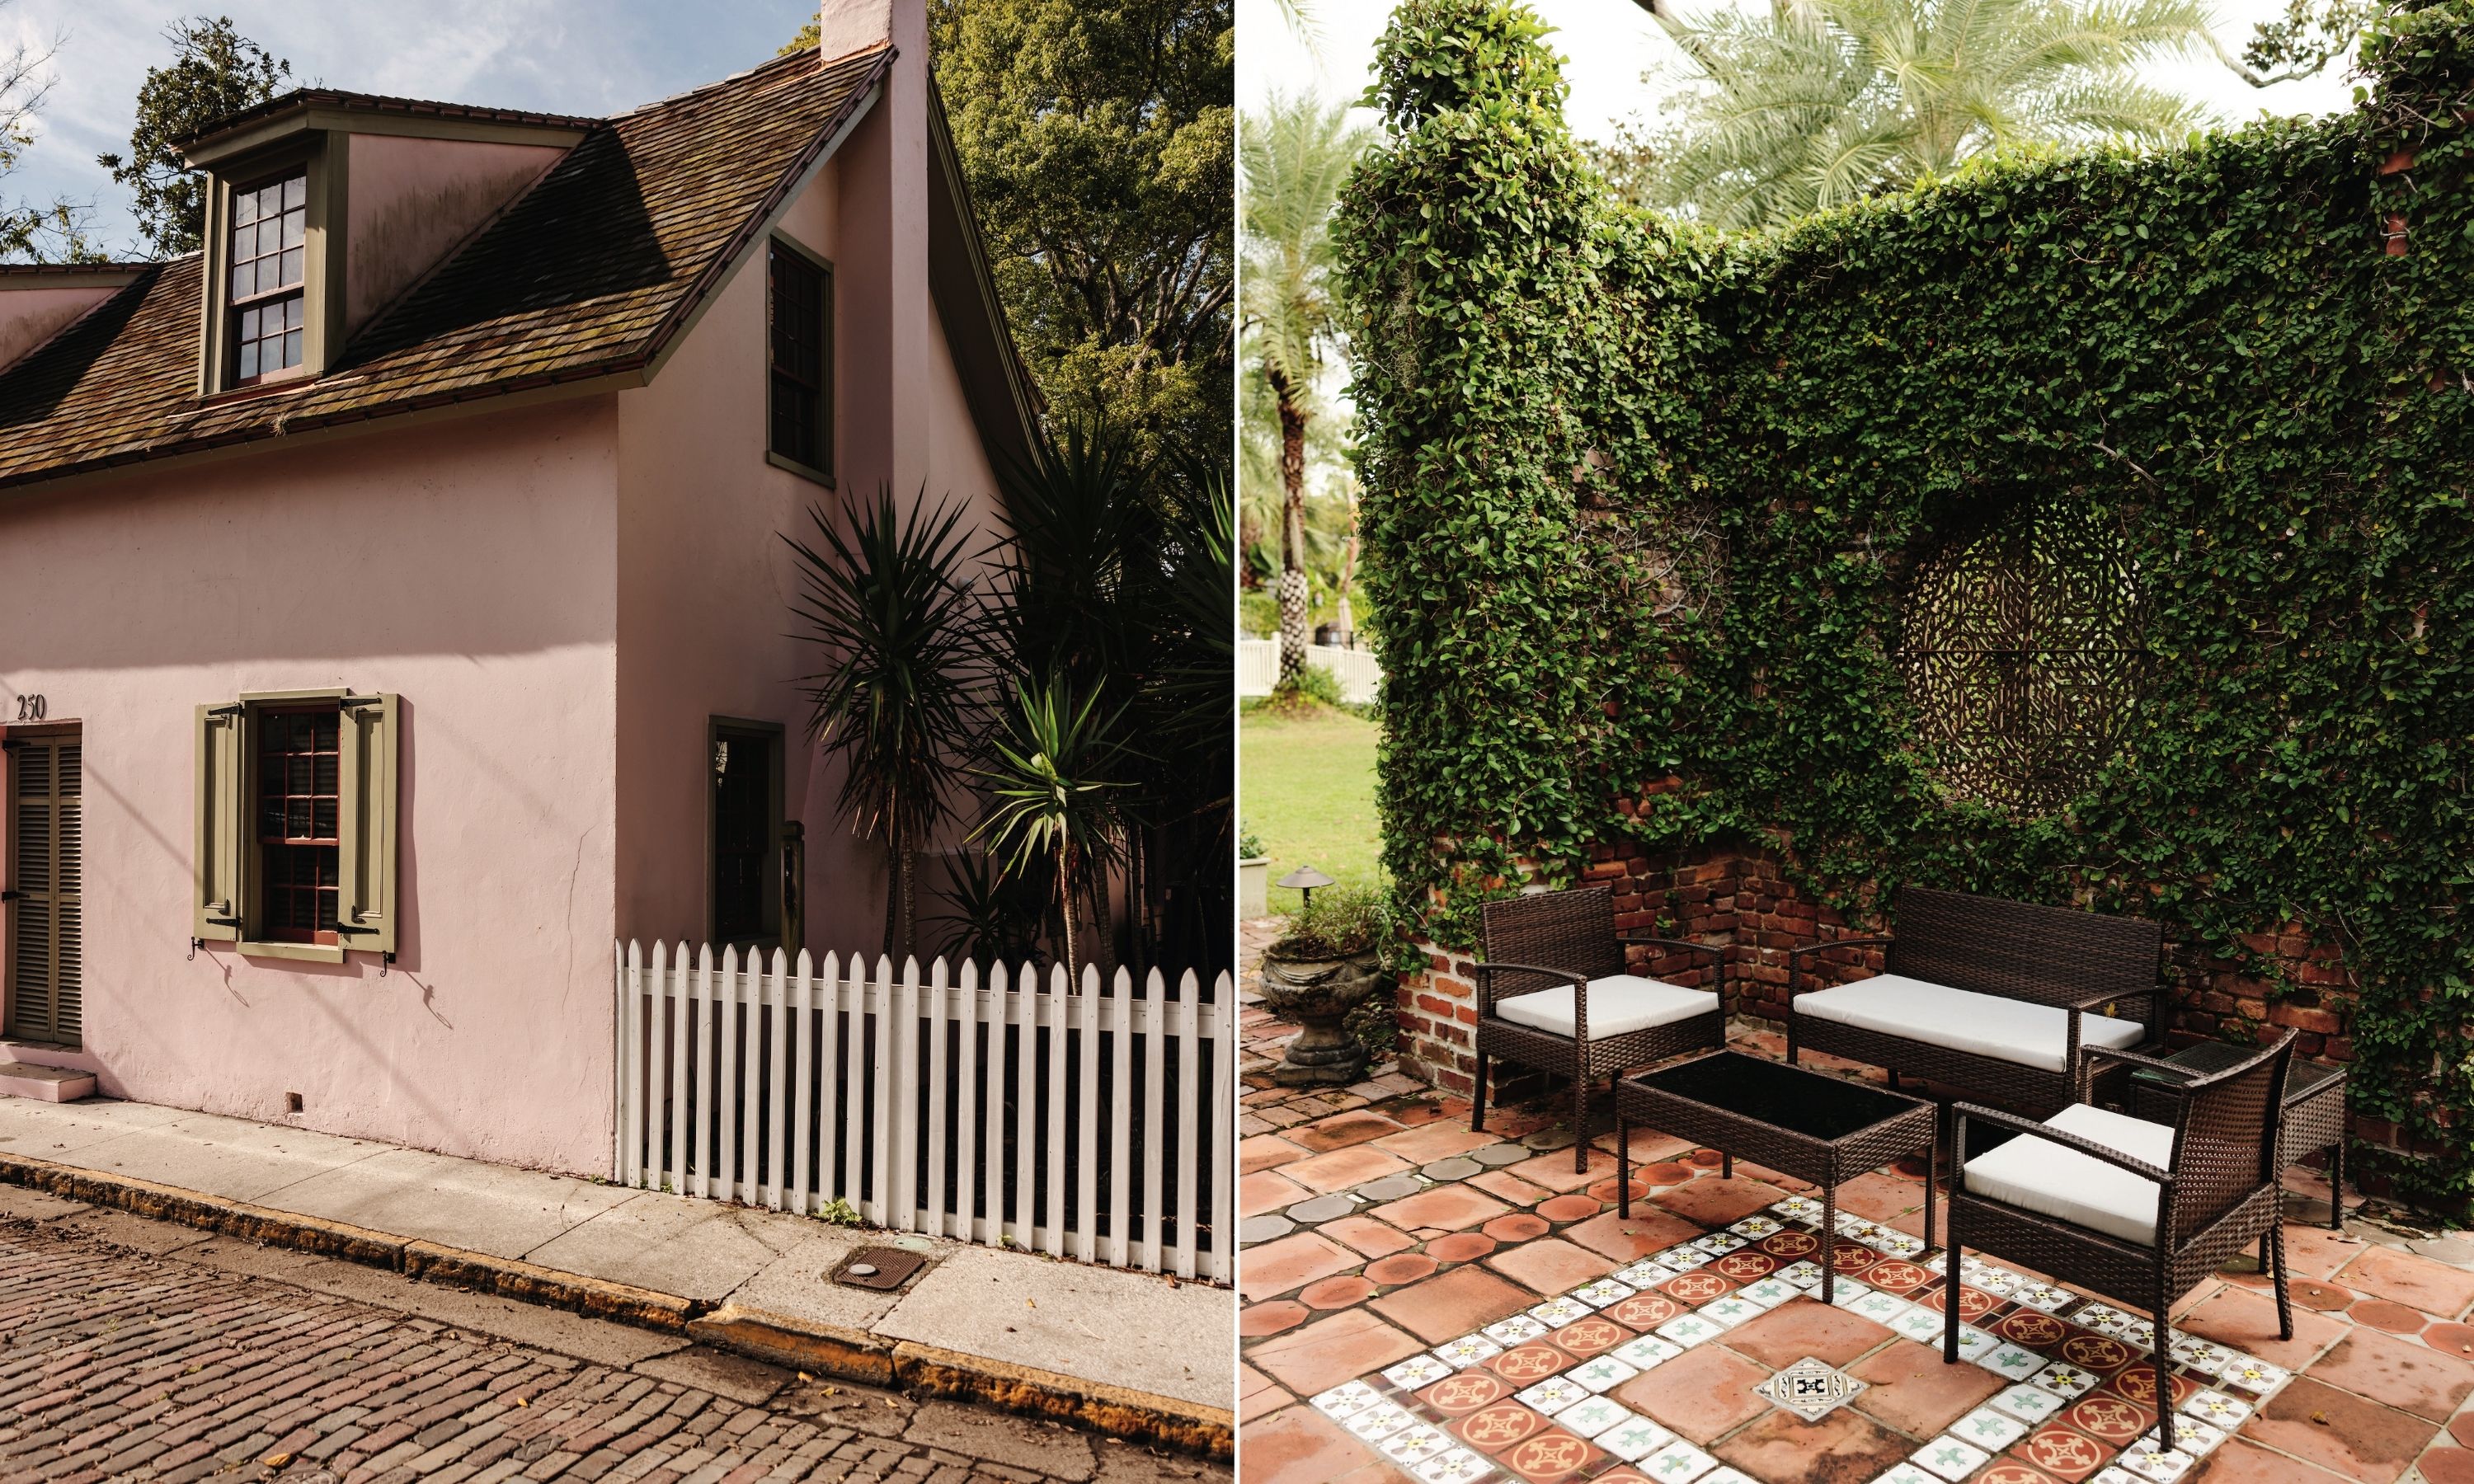 A collage of two images: a pink stone house with a wood shingle roof and palms; a patio with tall brick walls covered in greenery and seating.